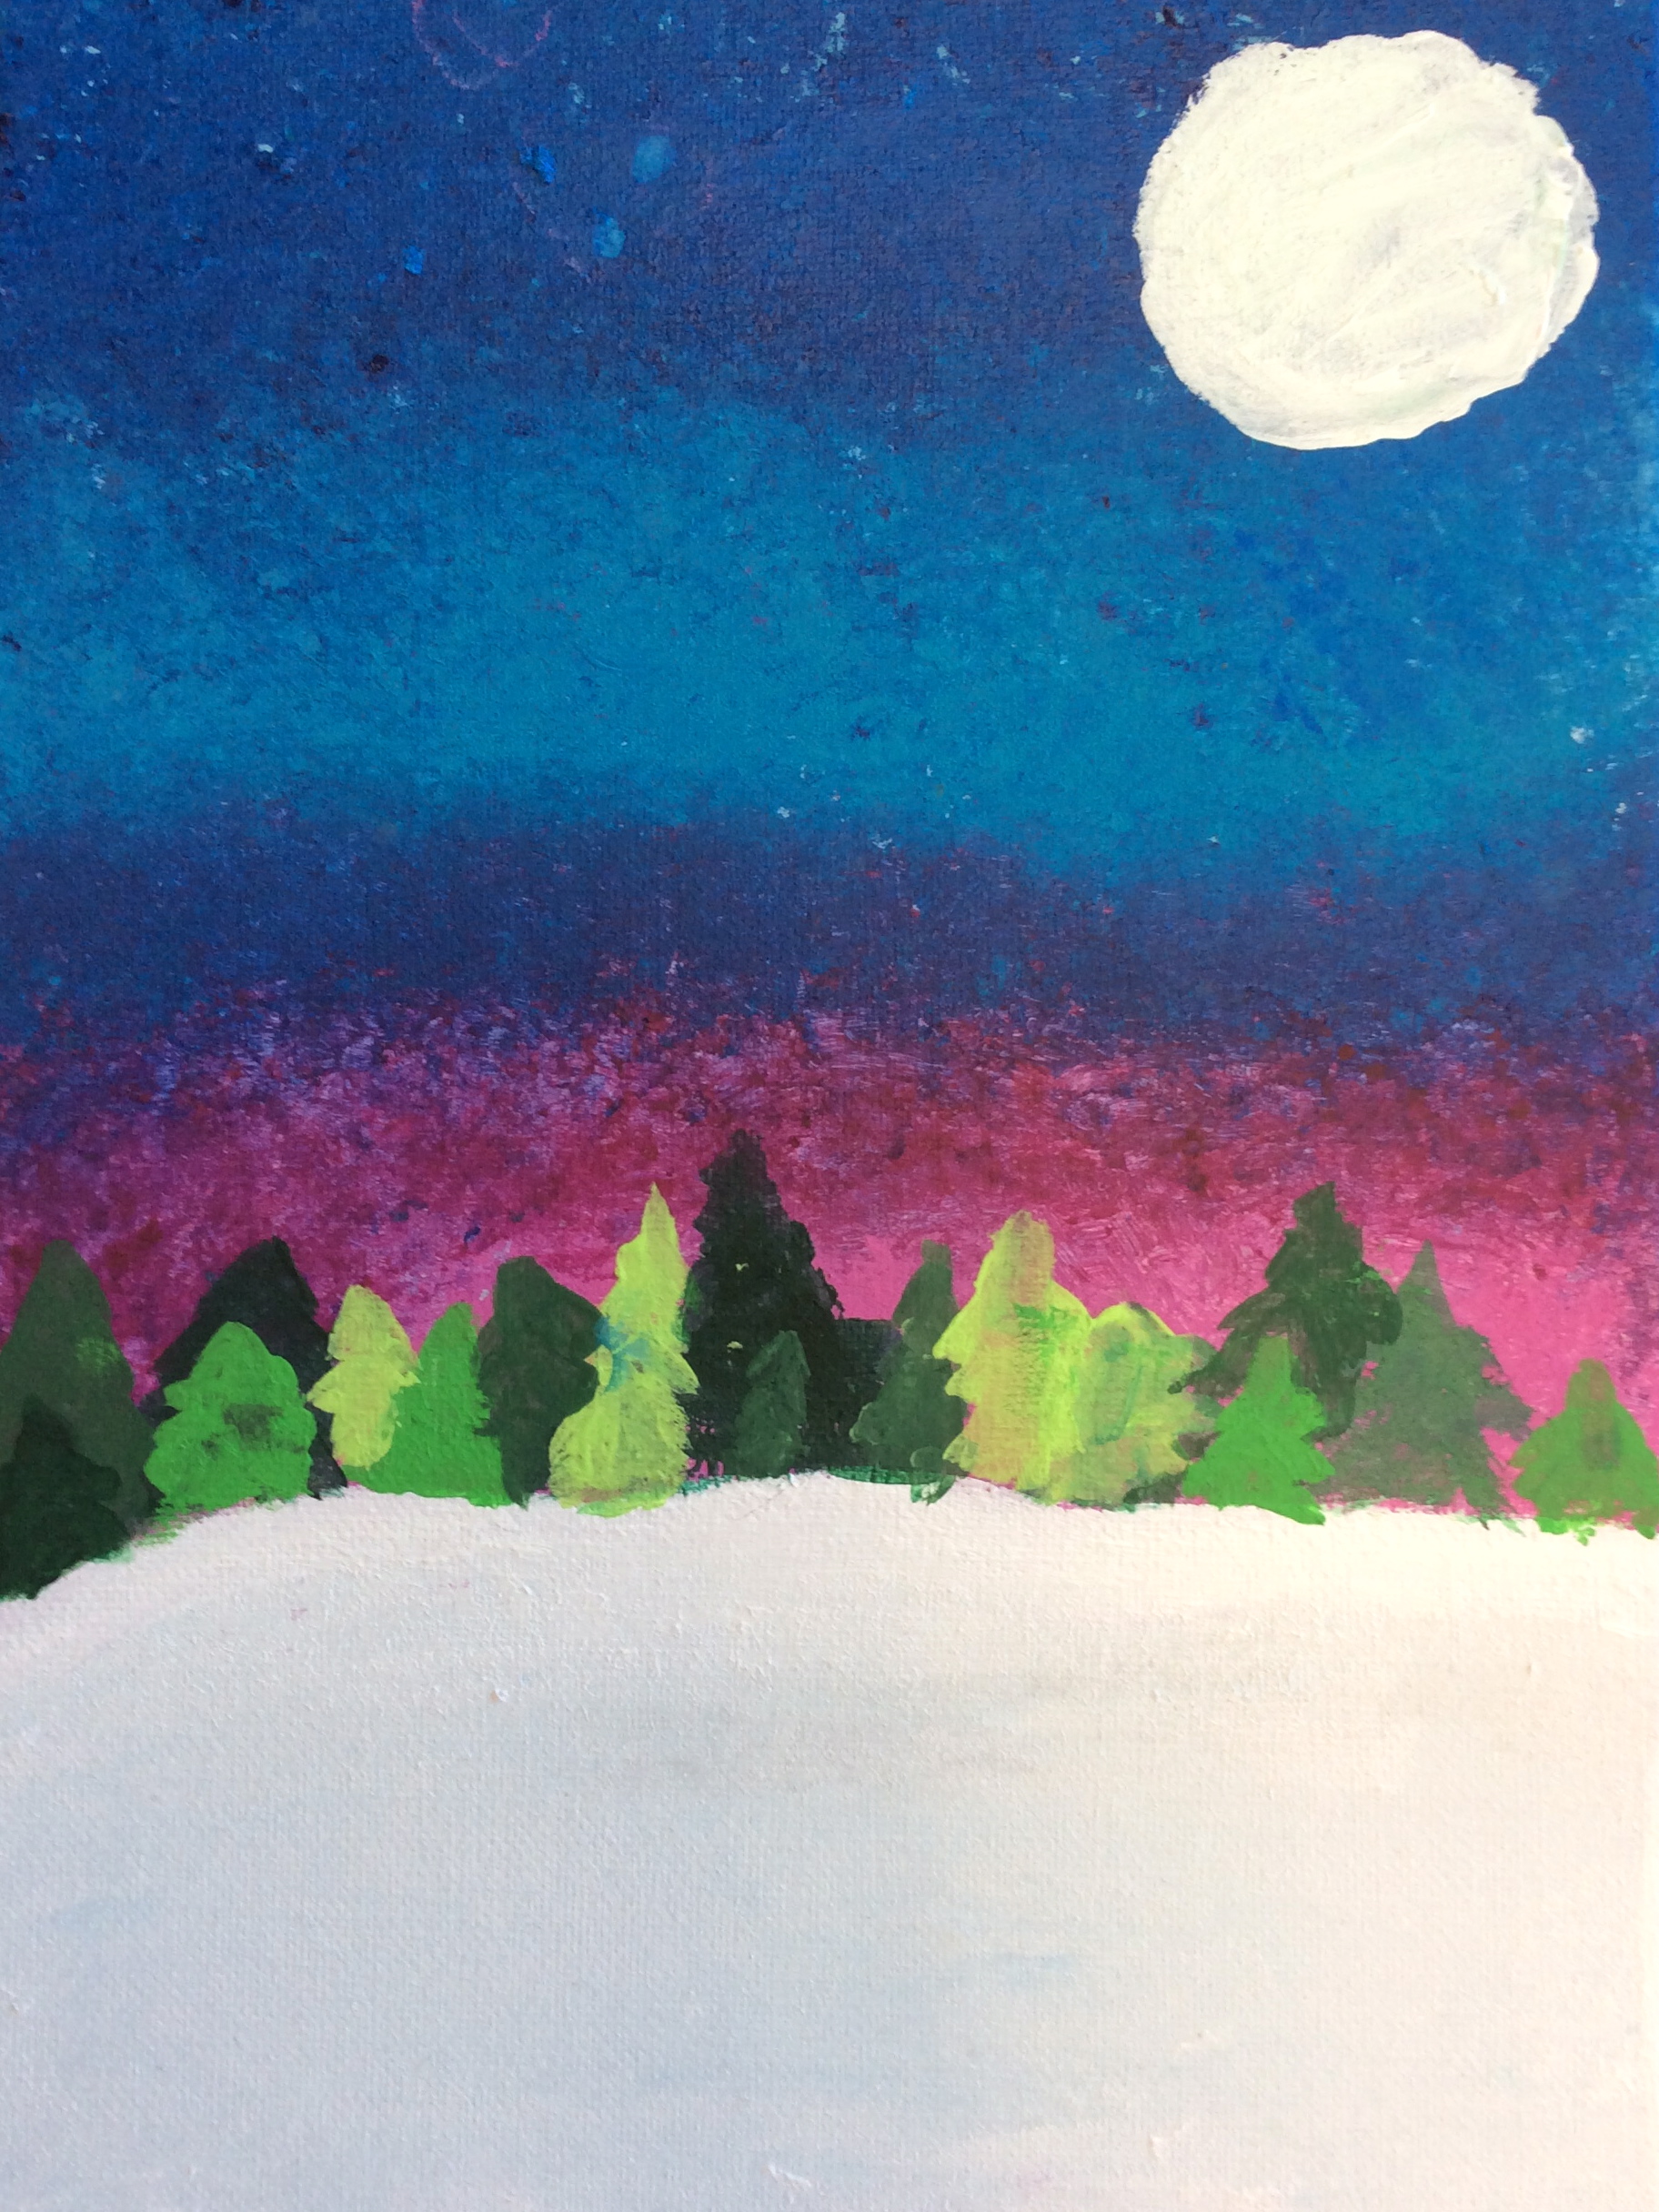 Winter Painting For Kids at PaintingValley.com | Explore collection of ...